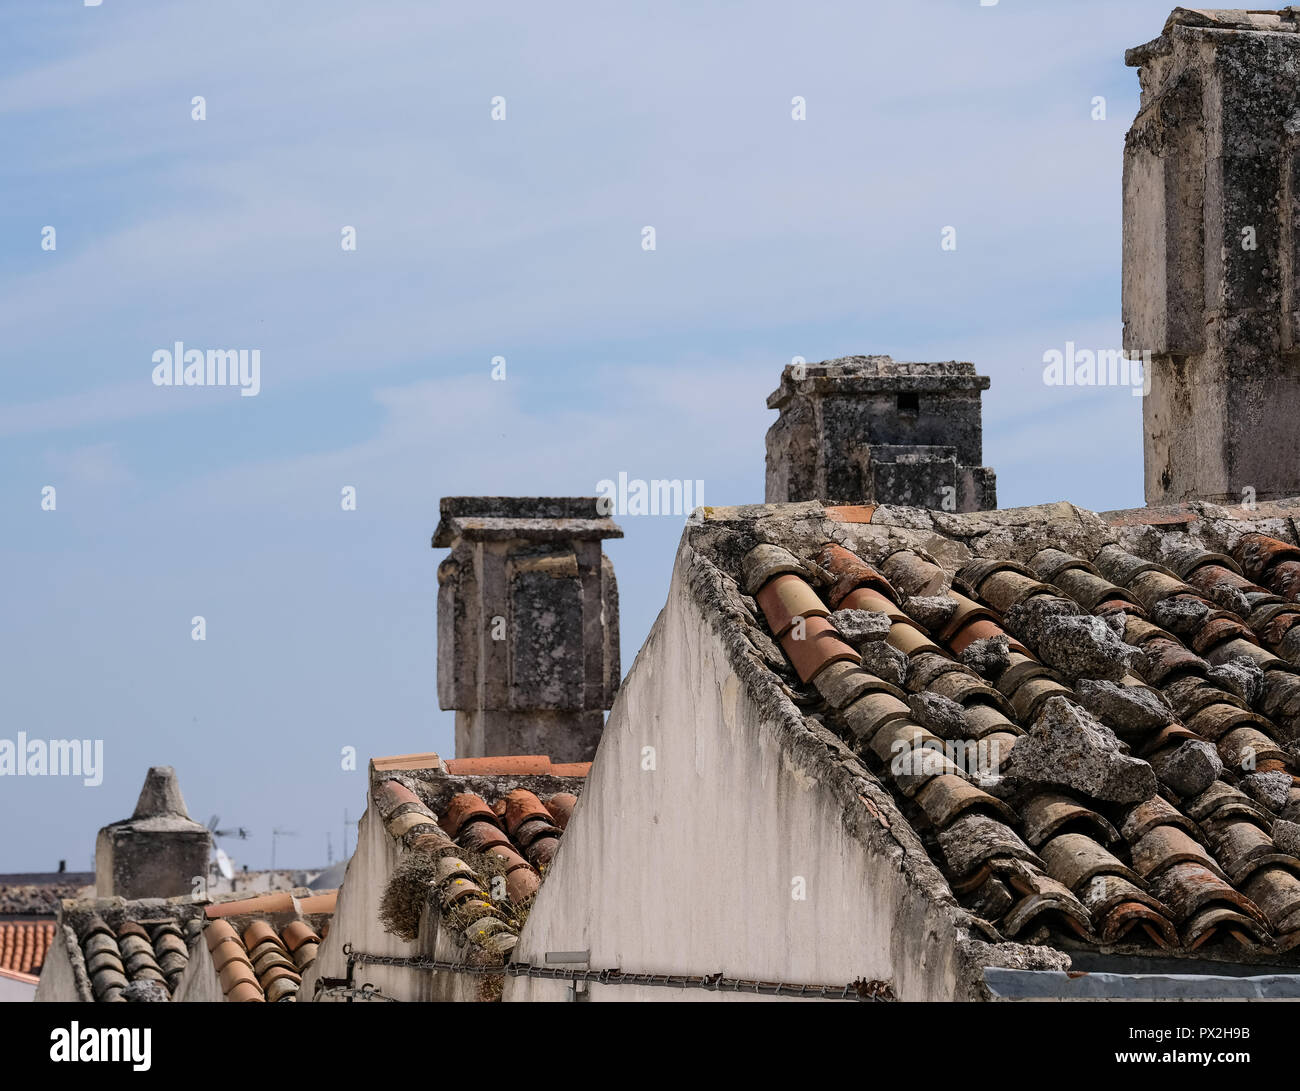 Roof top scene with red roof tiles in Monte Sant'Angelo, hilltop town in Puglia, southern Italy. Stock Photo